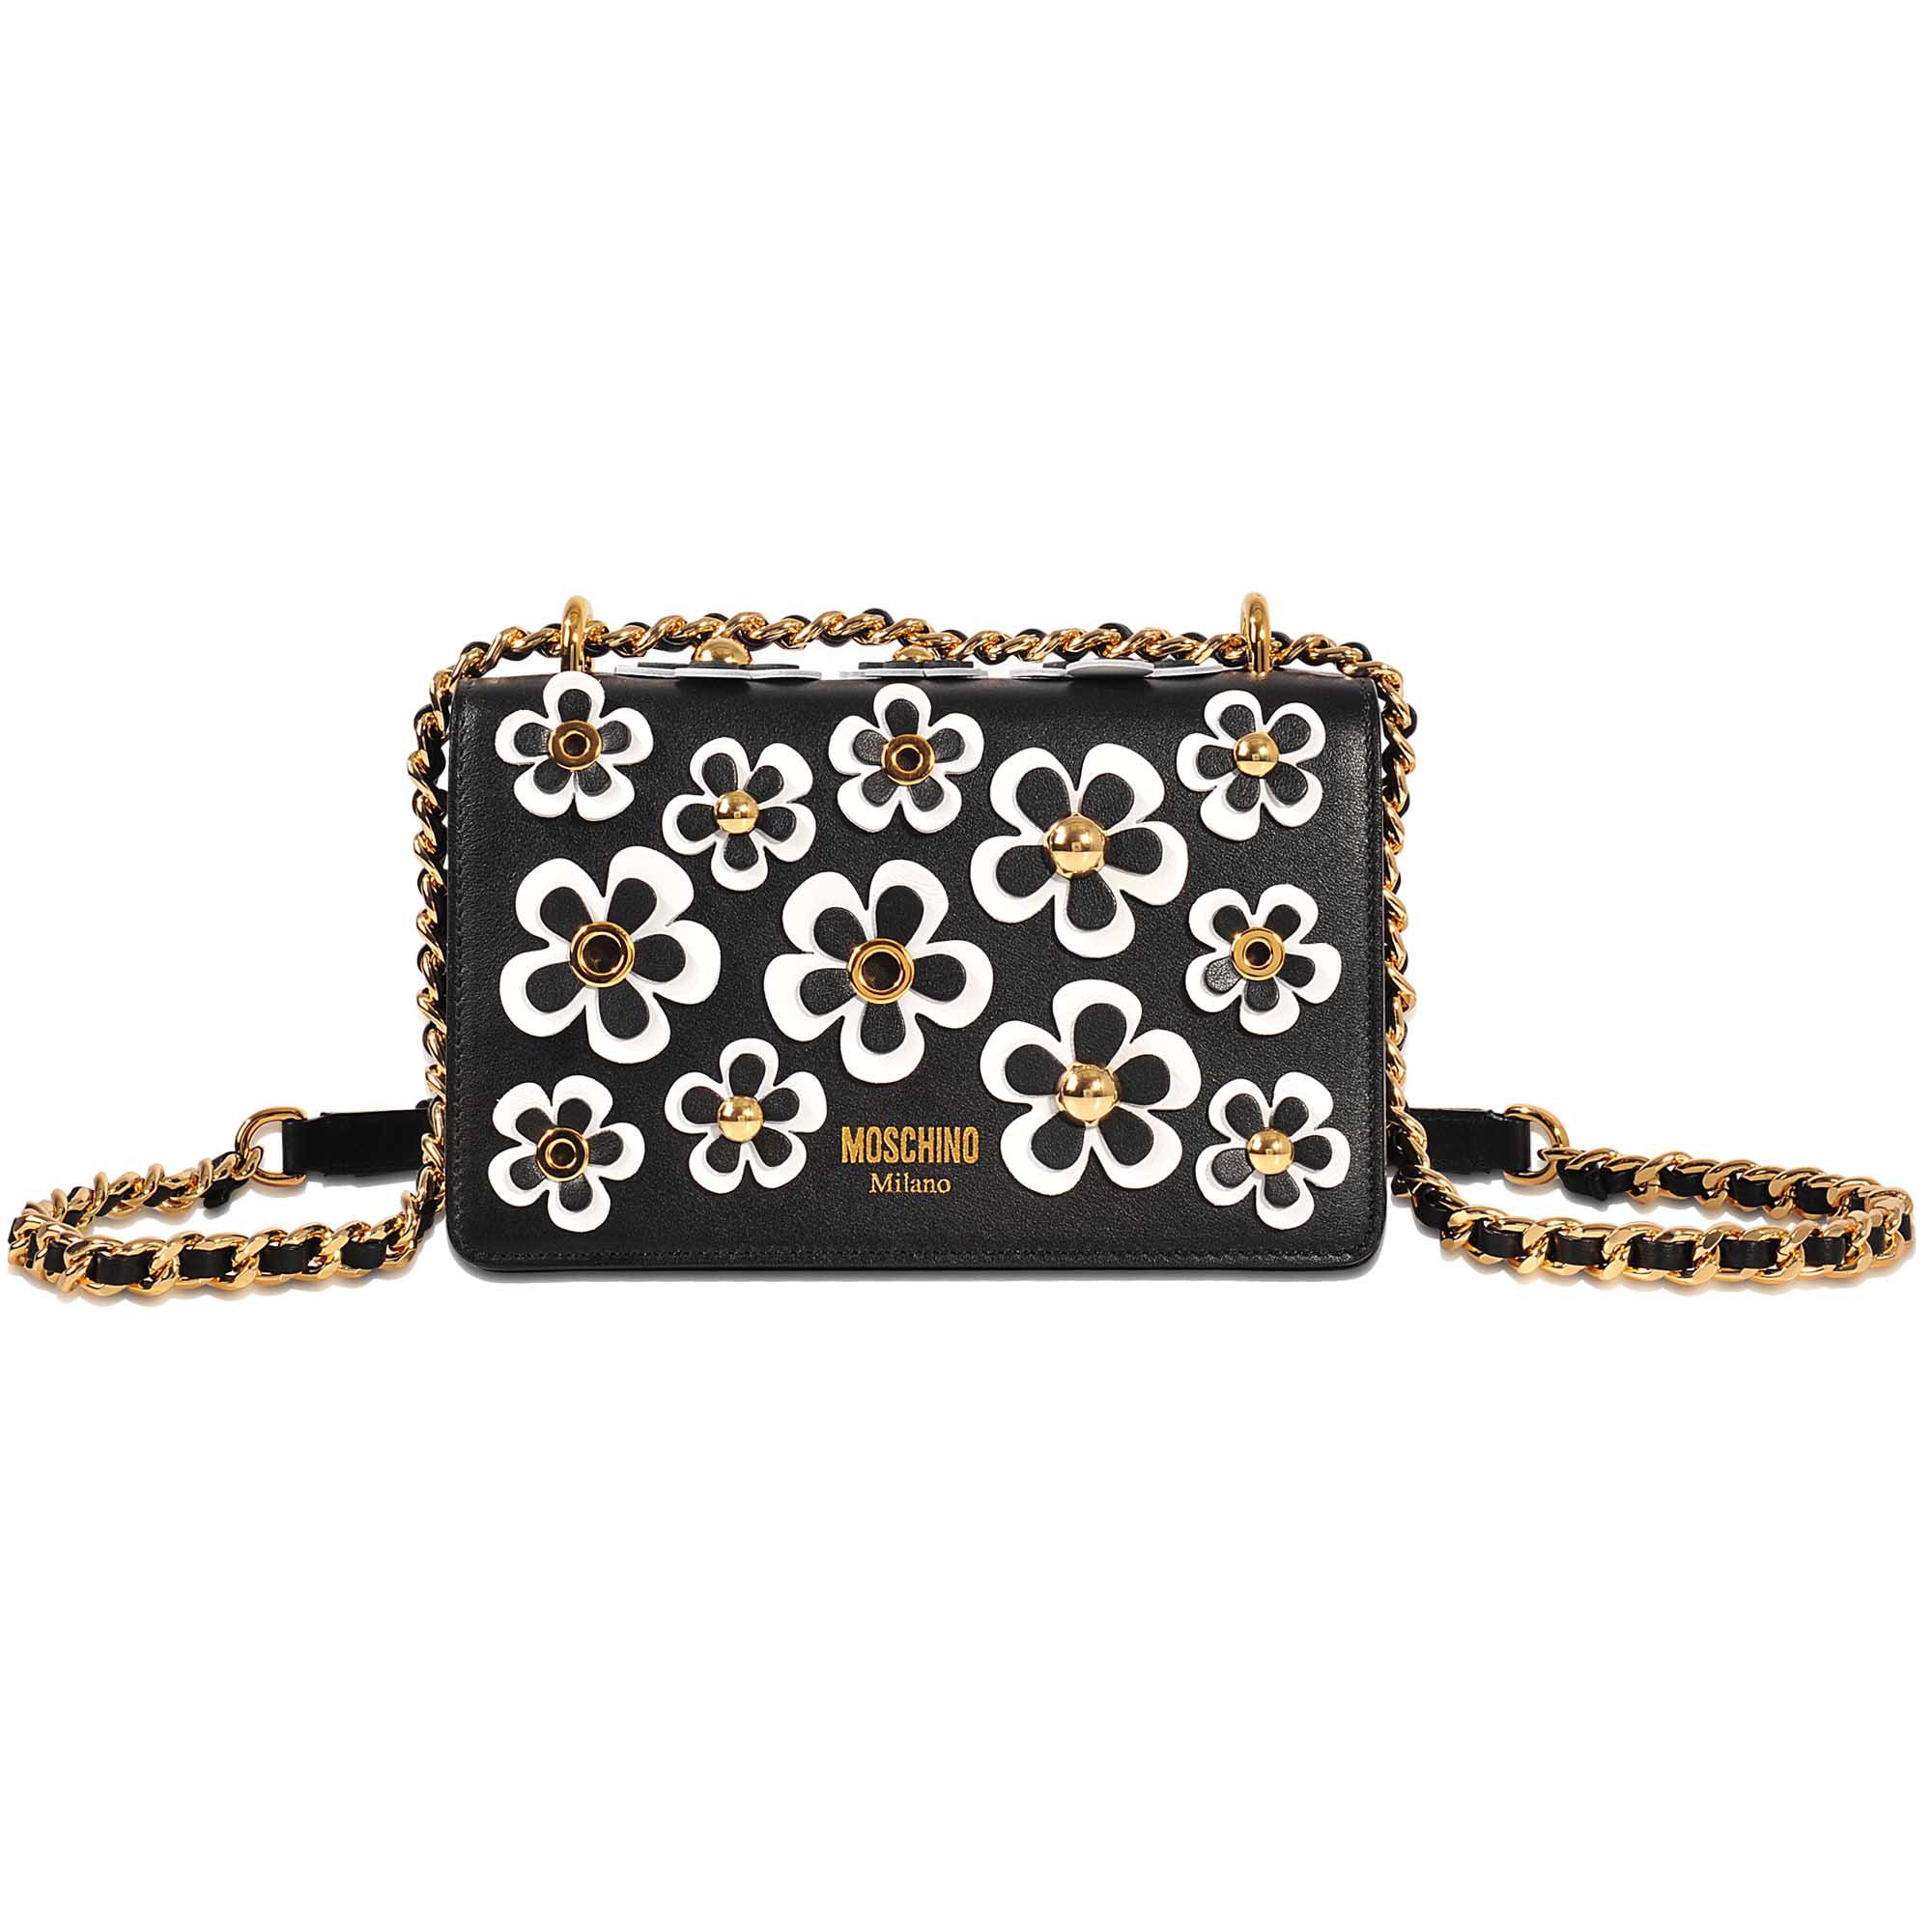 Moschino Leather Floral Bag in Black - Lyst